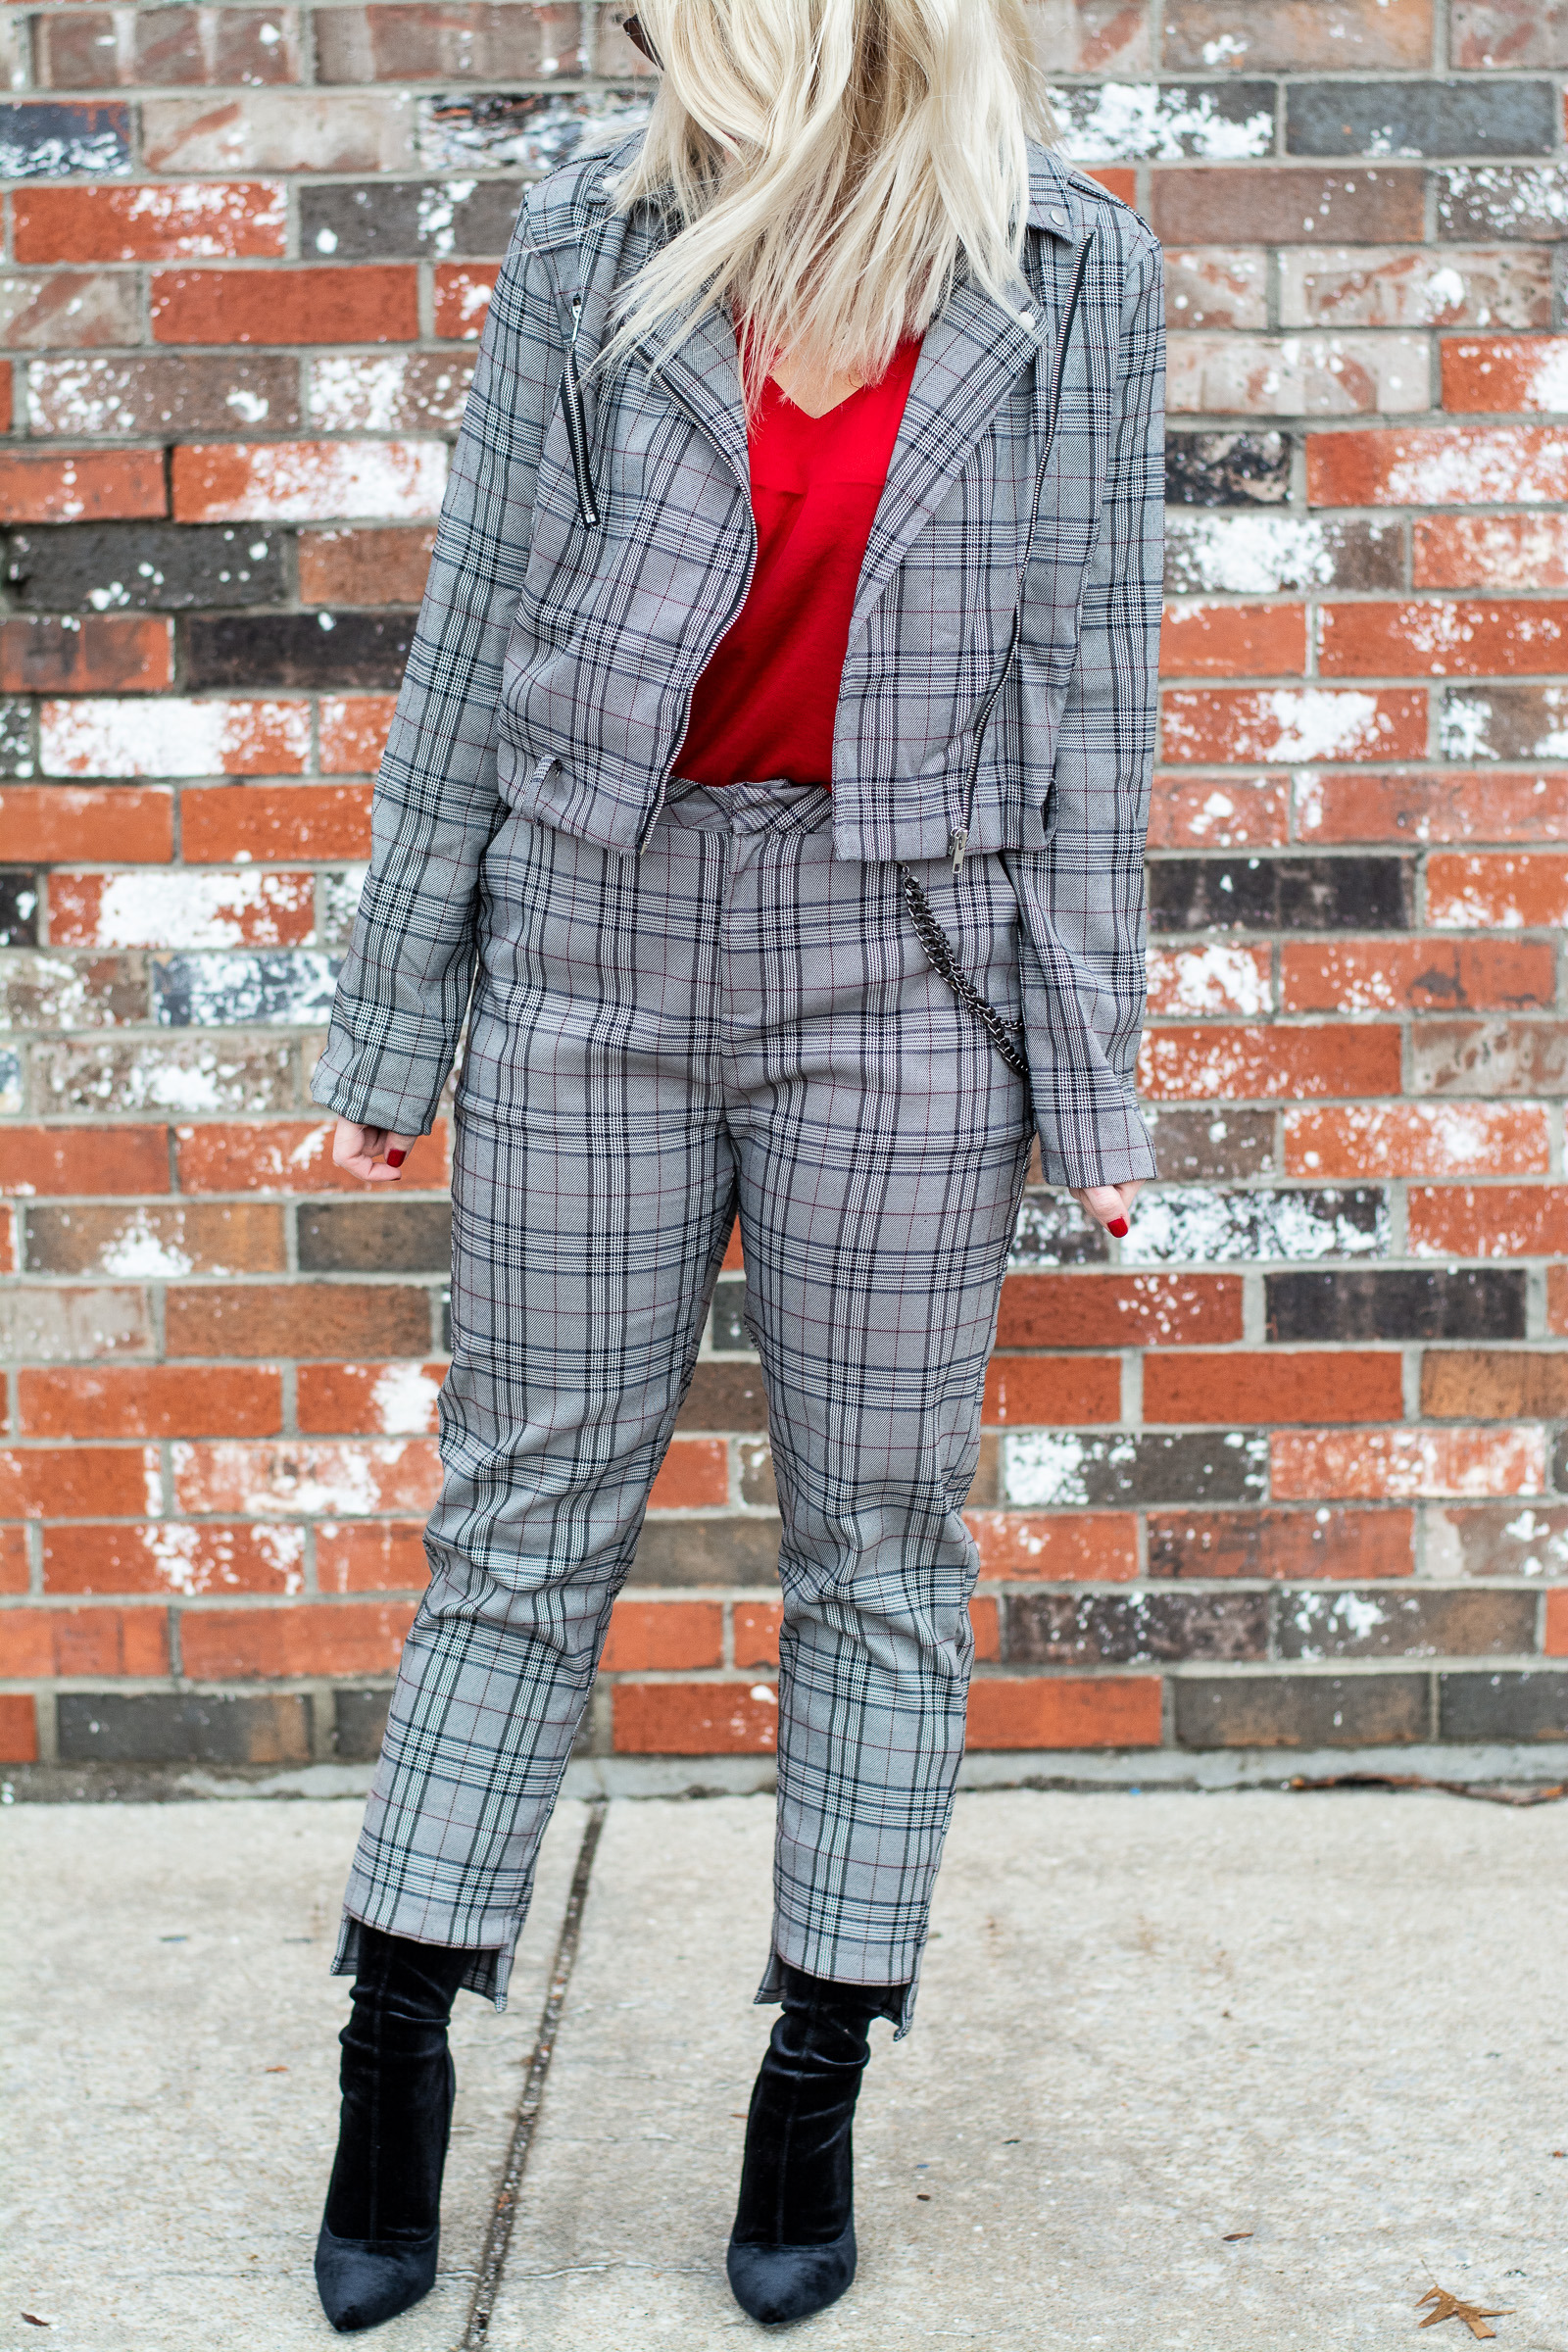 Plaid Suit + Holiday Red. | Ashley from LSR